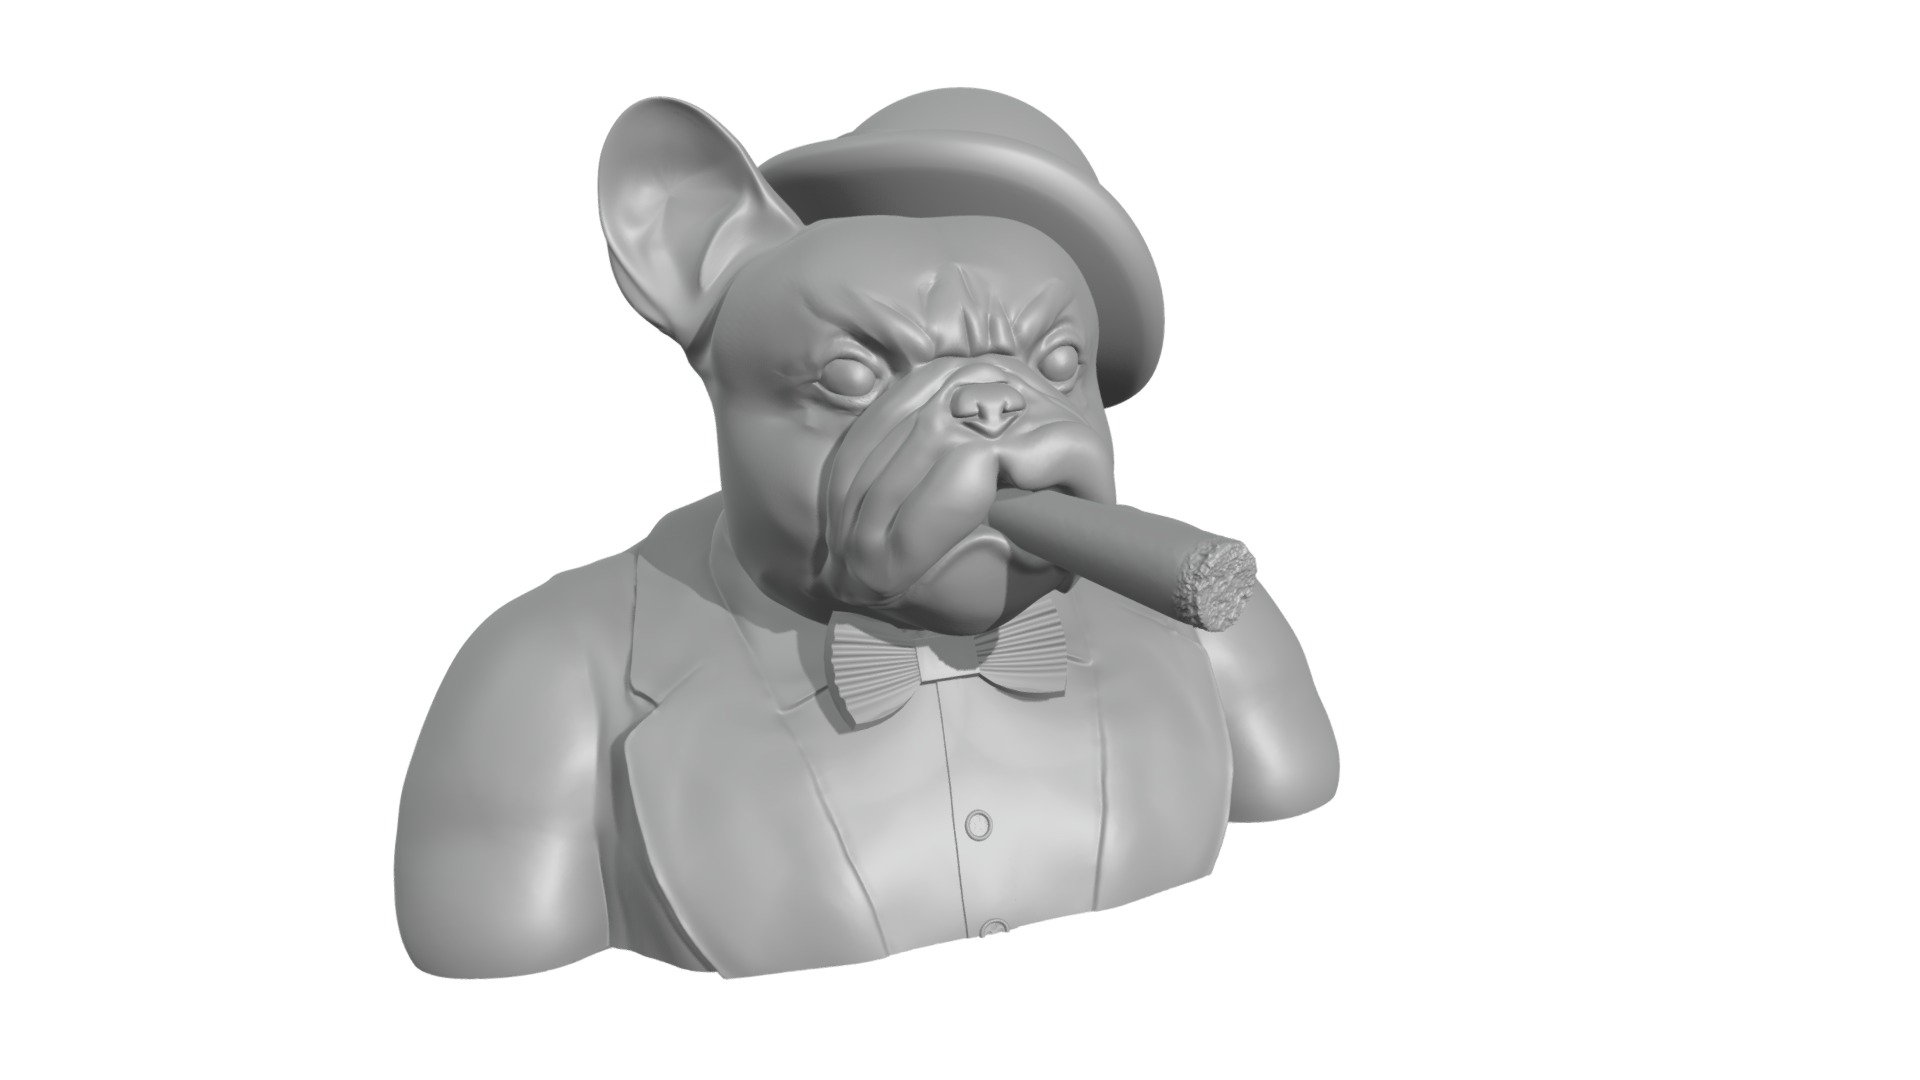 Gentleman French Bulldog half body smoker - dog - This design showcases a Bulldog, dressed in classy English gentleman’s clothing and derby (bowler hat) and cigar.

STL Model for 3D Printing.

Contact me for any question.

Came to see my other work.

If you get this model, I encourage you to give me feedback, just send me a message on instagram, I’d very happy to help or hear your feedback and pictures :)

For other custom products, please contact me, I would be glad to help you, I accept non or exclusive commissions.

If you like my art, please support me by purchasing my models, or following me on social media:

Instagram: https://www.instagram.com/animaartistspieces/

TikTok: https://www.tiktok.com/@animaartistspieces?lang=it

Facebook: https://www.facebook.com/profile.php?id=100087530776989

WEBSITE: https://www.animacampania.it/site/

Linktree: https://linktr.ee/animaartistspieces - Gentleman French Bulldog bowler hat and cigar 3d model